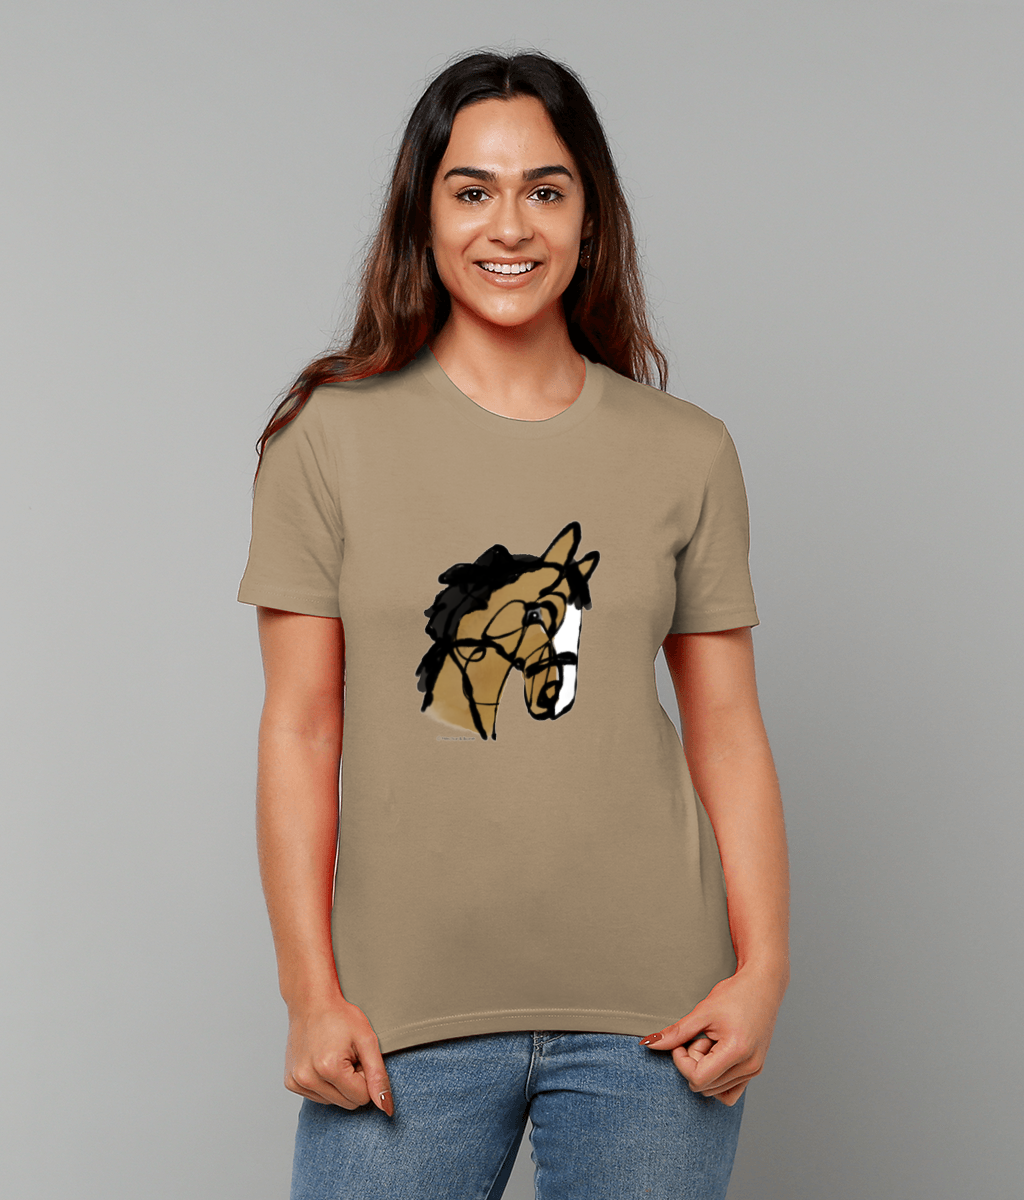 Horse T-shirt - Smiling young woman wearing an 'I love my horse' pony t-shirt design on camel colour vegan cotton by Hector and Bone